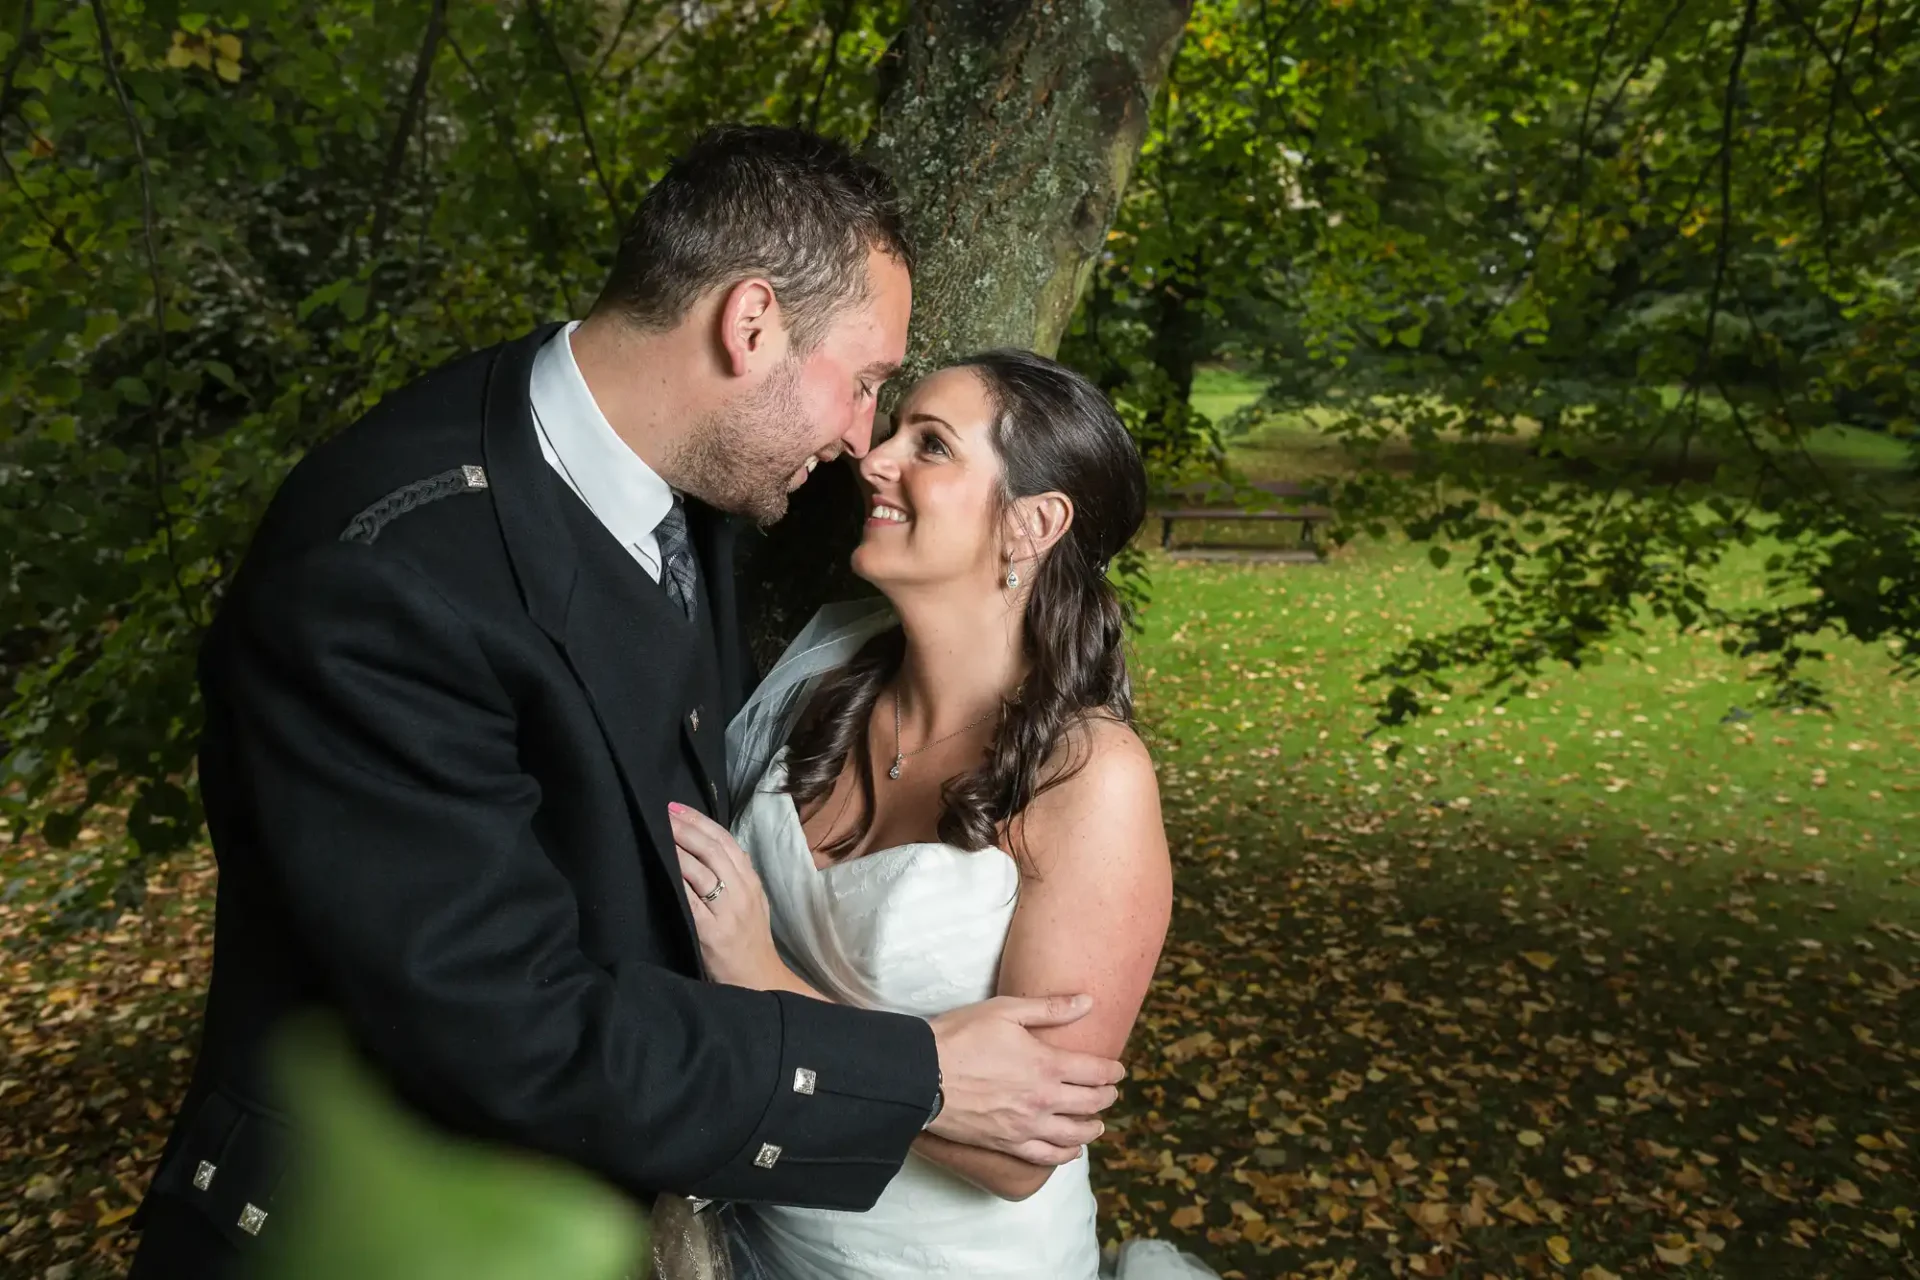 A bride and groom embrace affectionately in a lush, green park, with sunlight filtering through the trees.